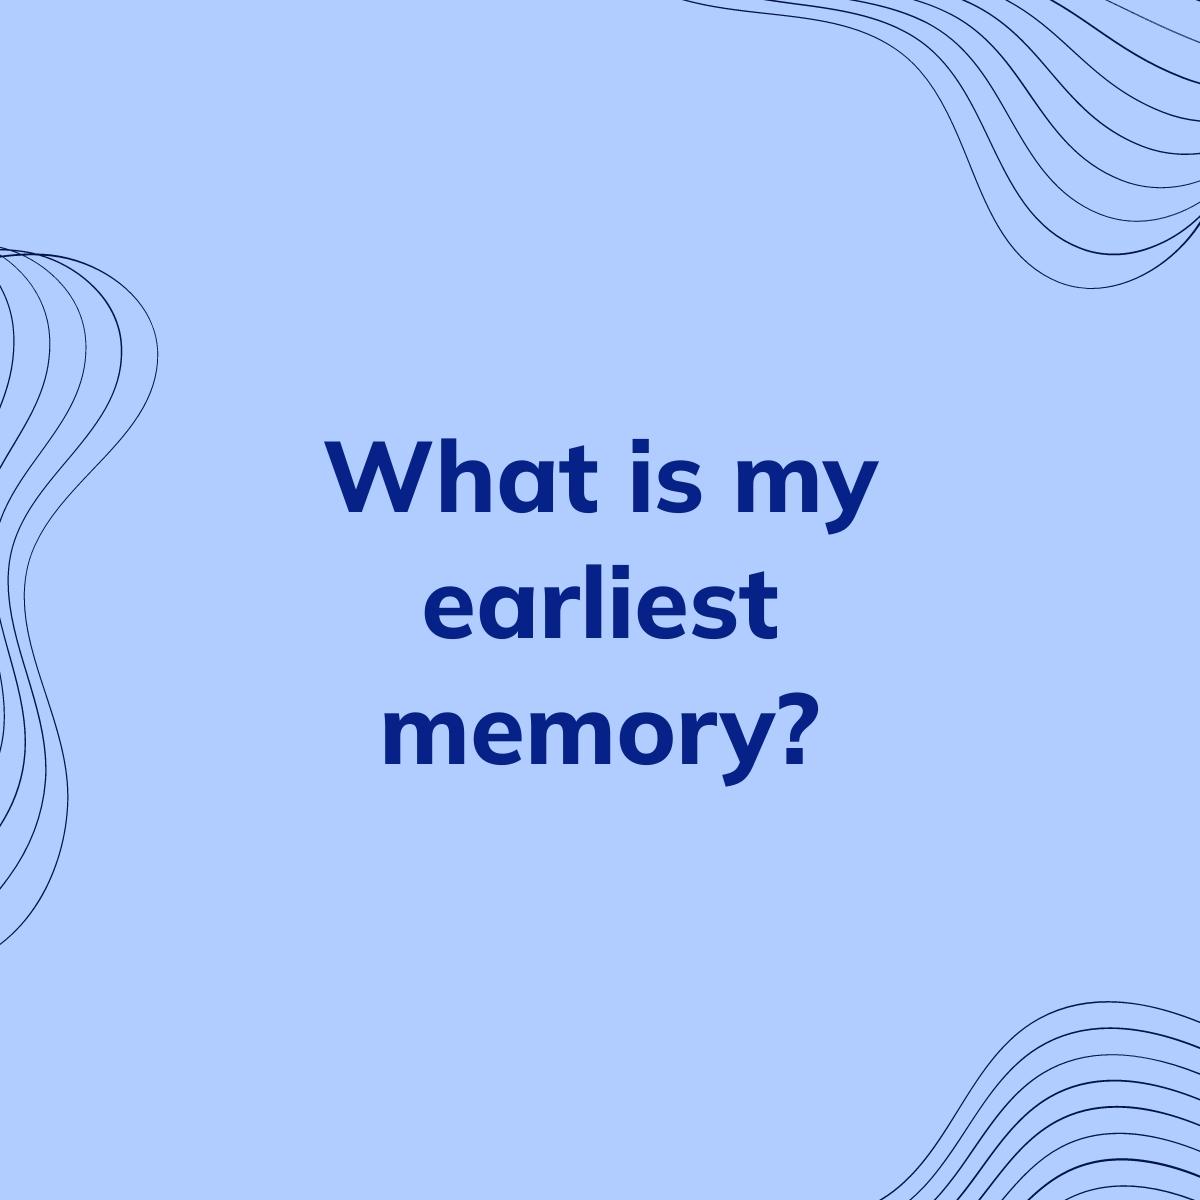 Journal Prompt: What is my earliest memory?